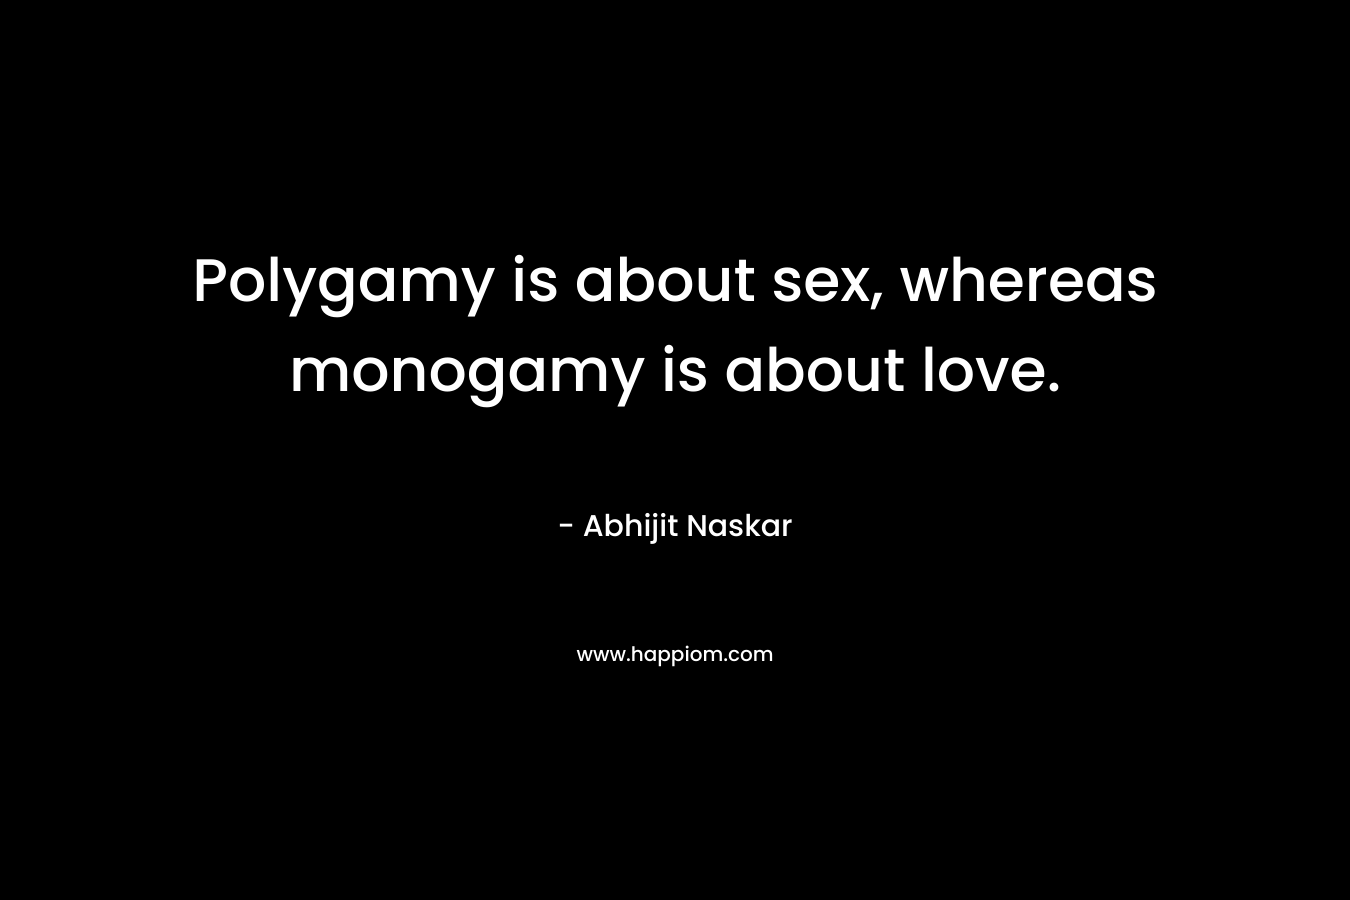 Polygamy is about sex, whereas monogamy is about love.